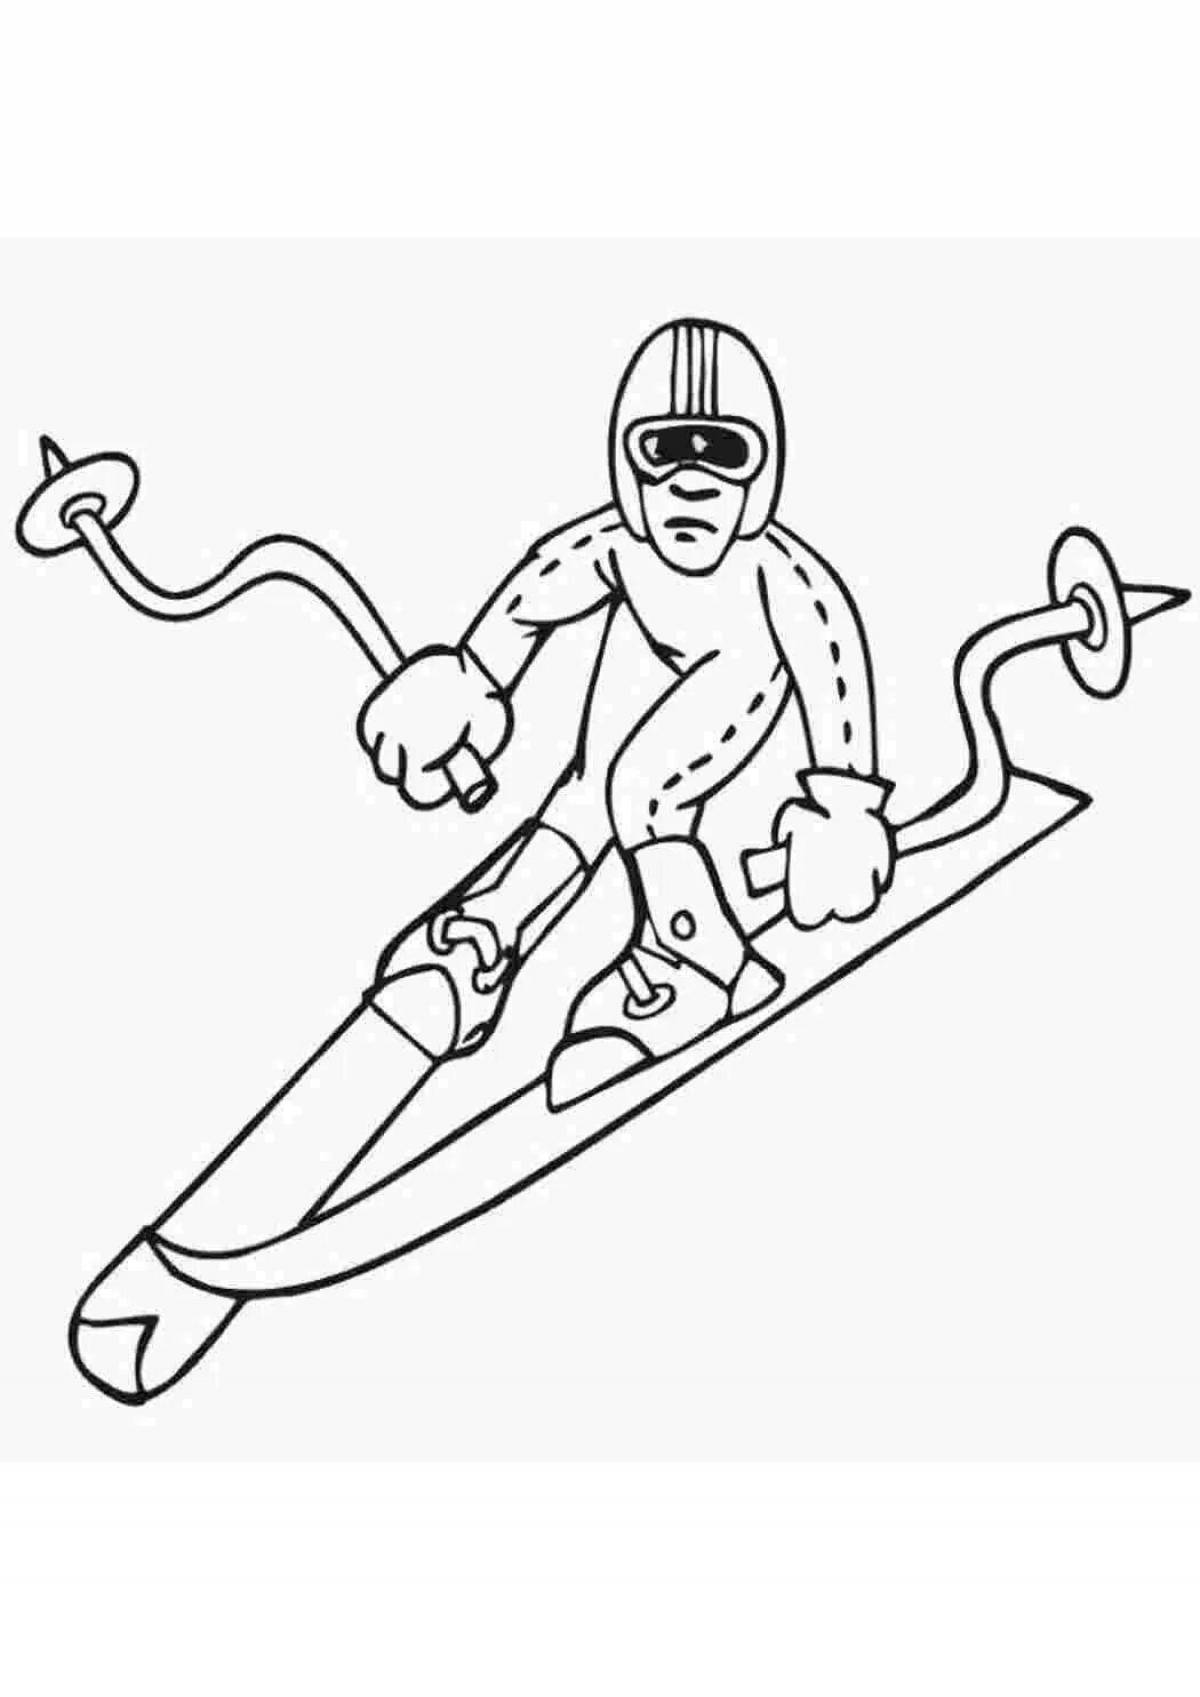 A fun coloring book for winter sports on a dhow